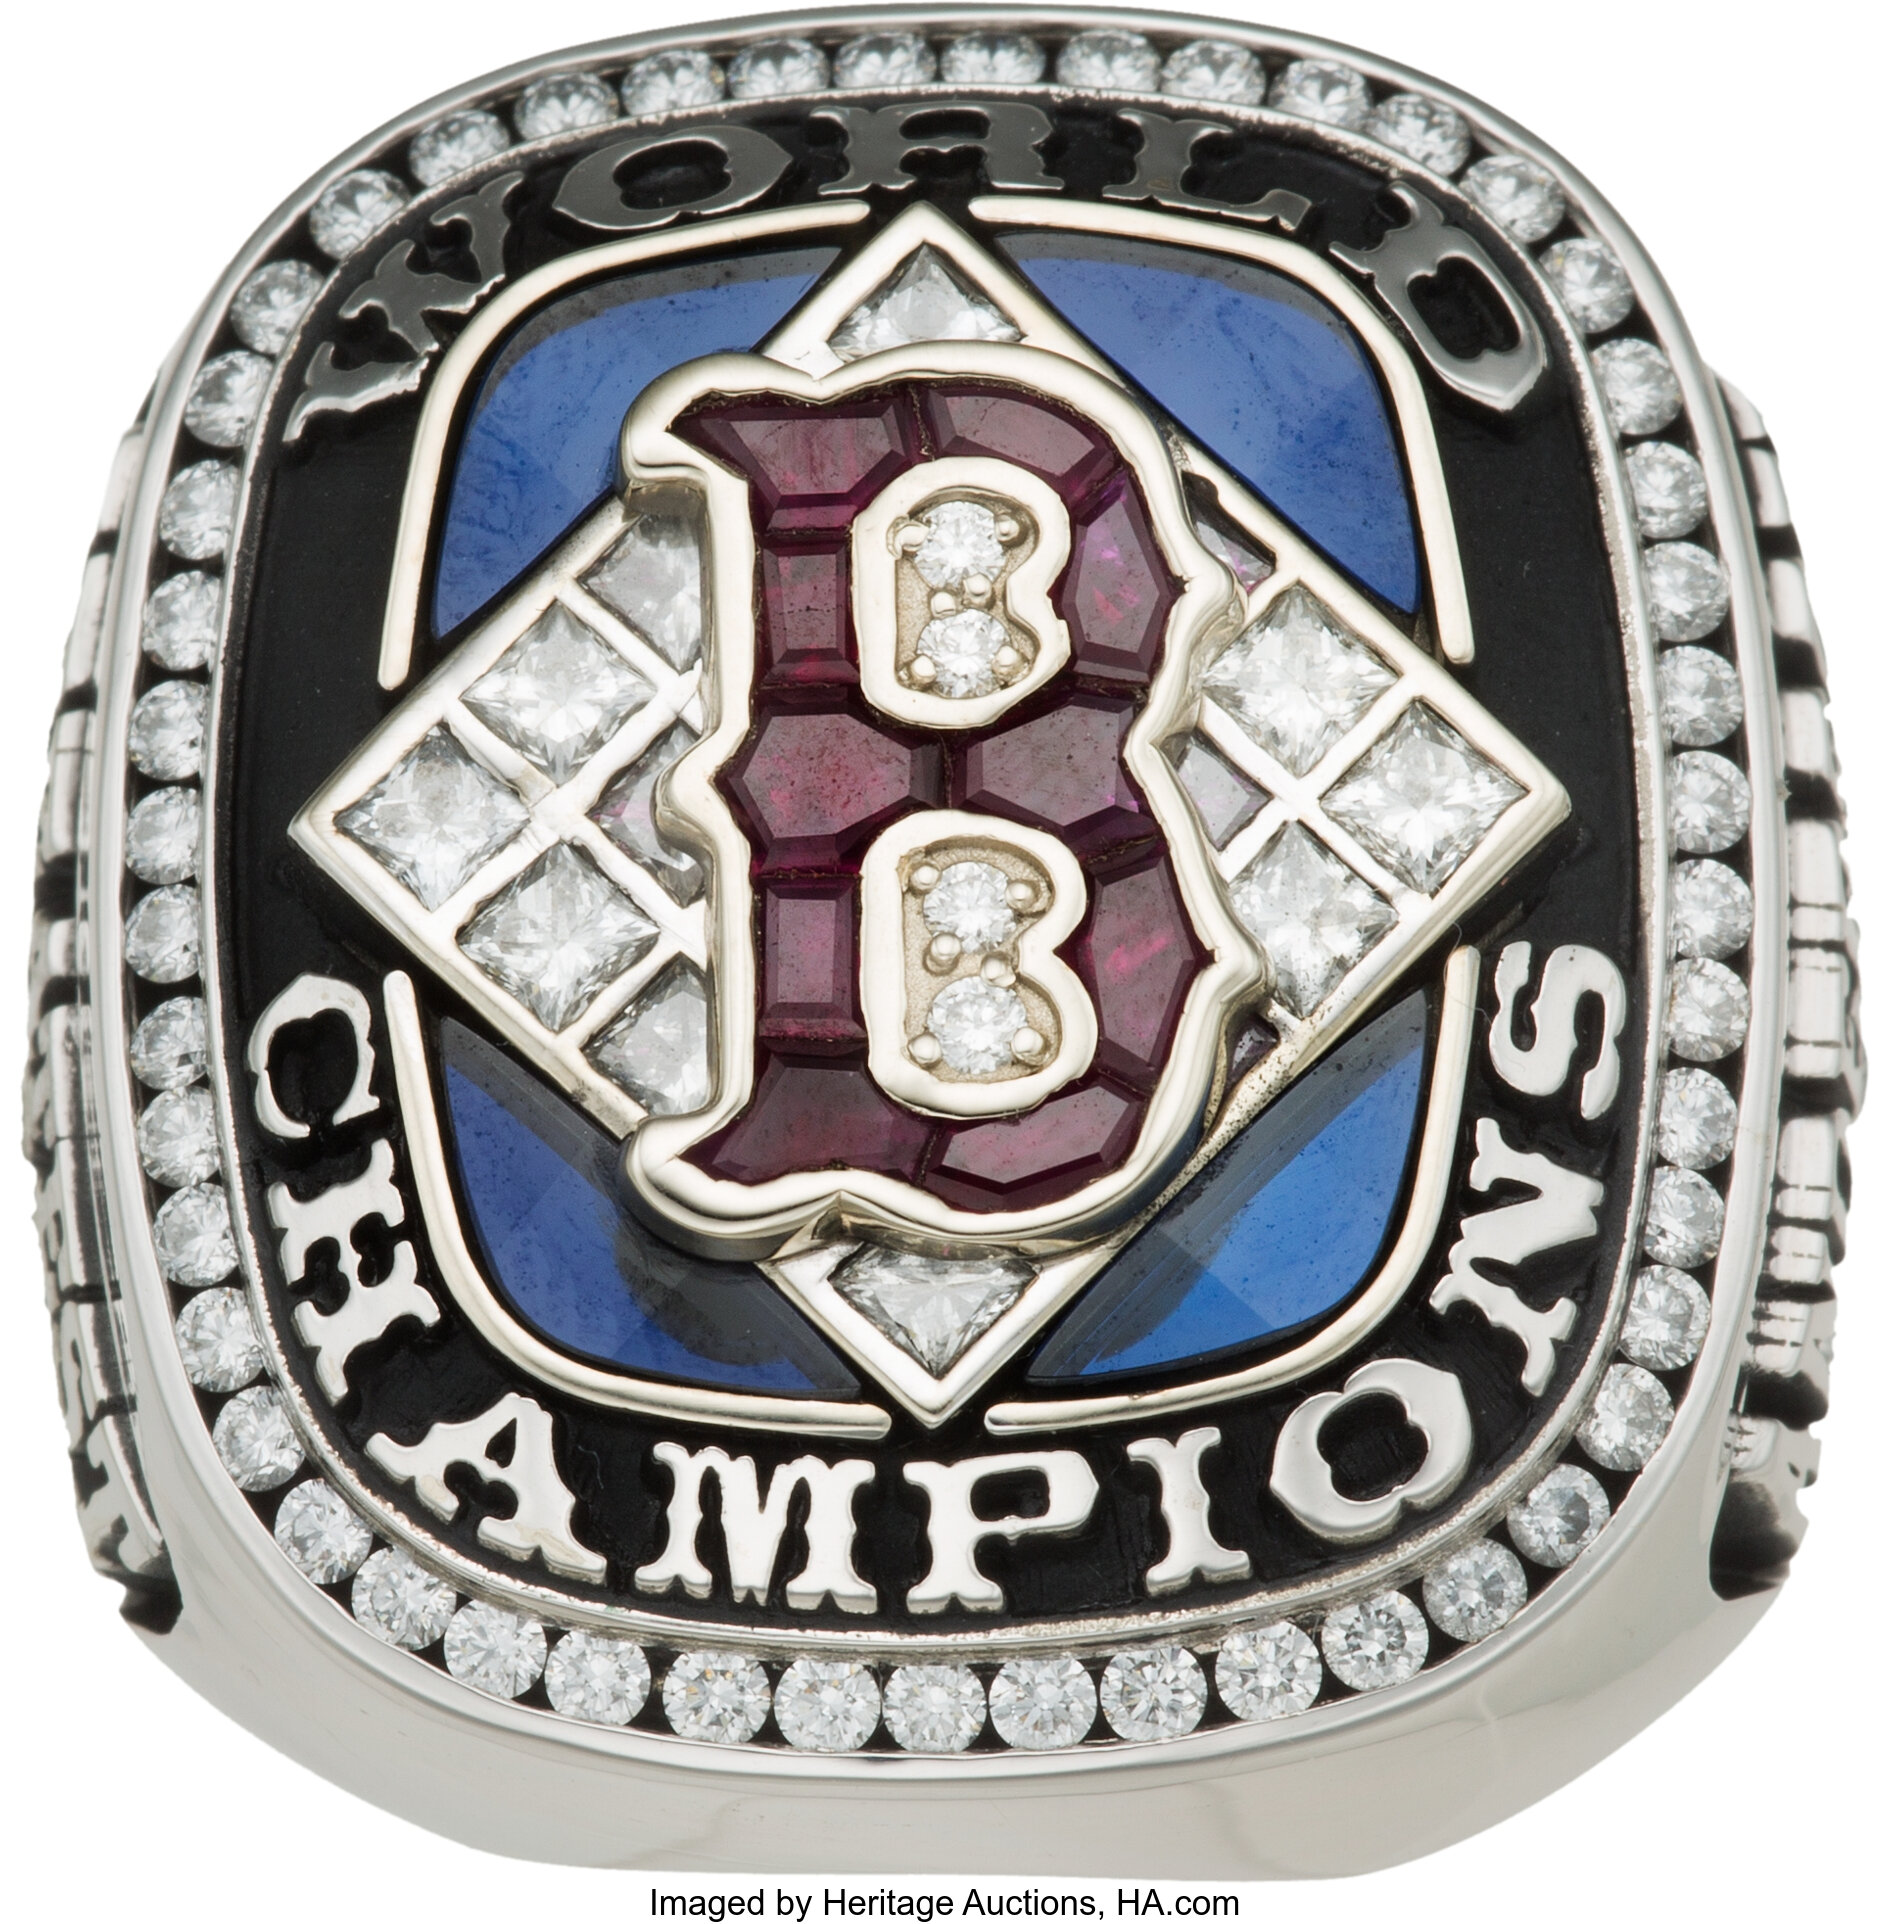 Reds legend auctioning off World Series rings